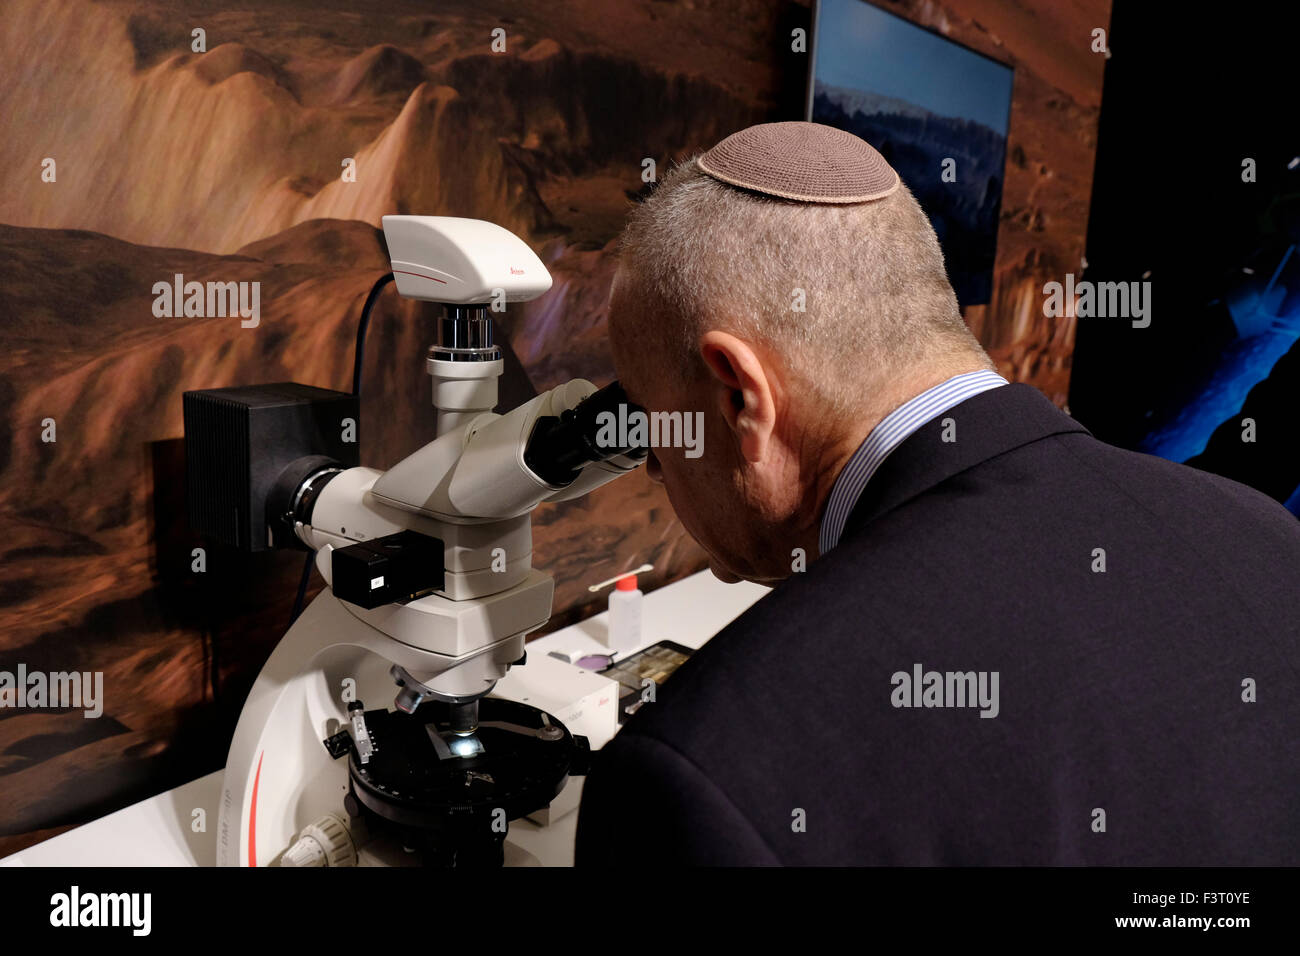 Jerusalem, Israel. 12th October, 2015. An Israeli Jewish visitor at the German Institute of Planetary research booth at the IAC International Astronautical Congress in Jerusalem, Israel on 12 October 2015. Israel’s space sector has significantly developed and expanded recent years in diverse areas of interest. Israeli President Reuven Rivlin, along with representatives of Google and Spacell an Israeli space engineering company, announced last week that Israel plans to land a private spacecraft on the moon before the end of 2017. Credit:  Eddie Gerald/Alamy Live News Stock Photo